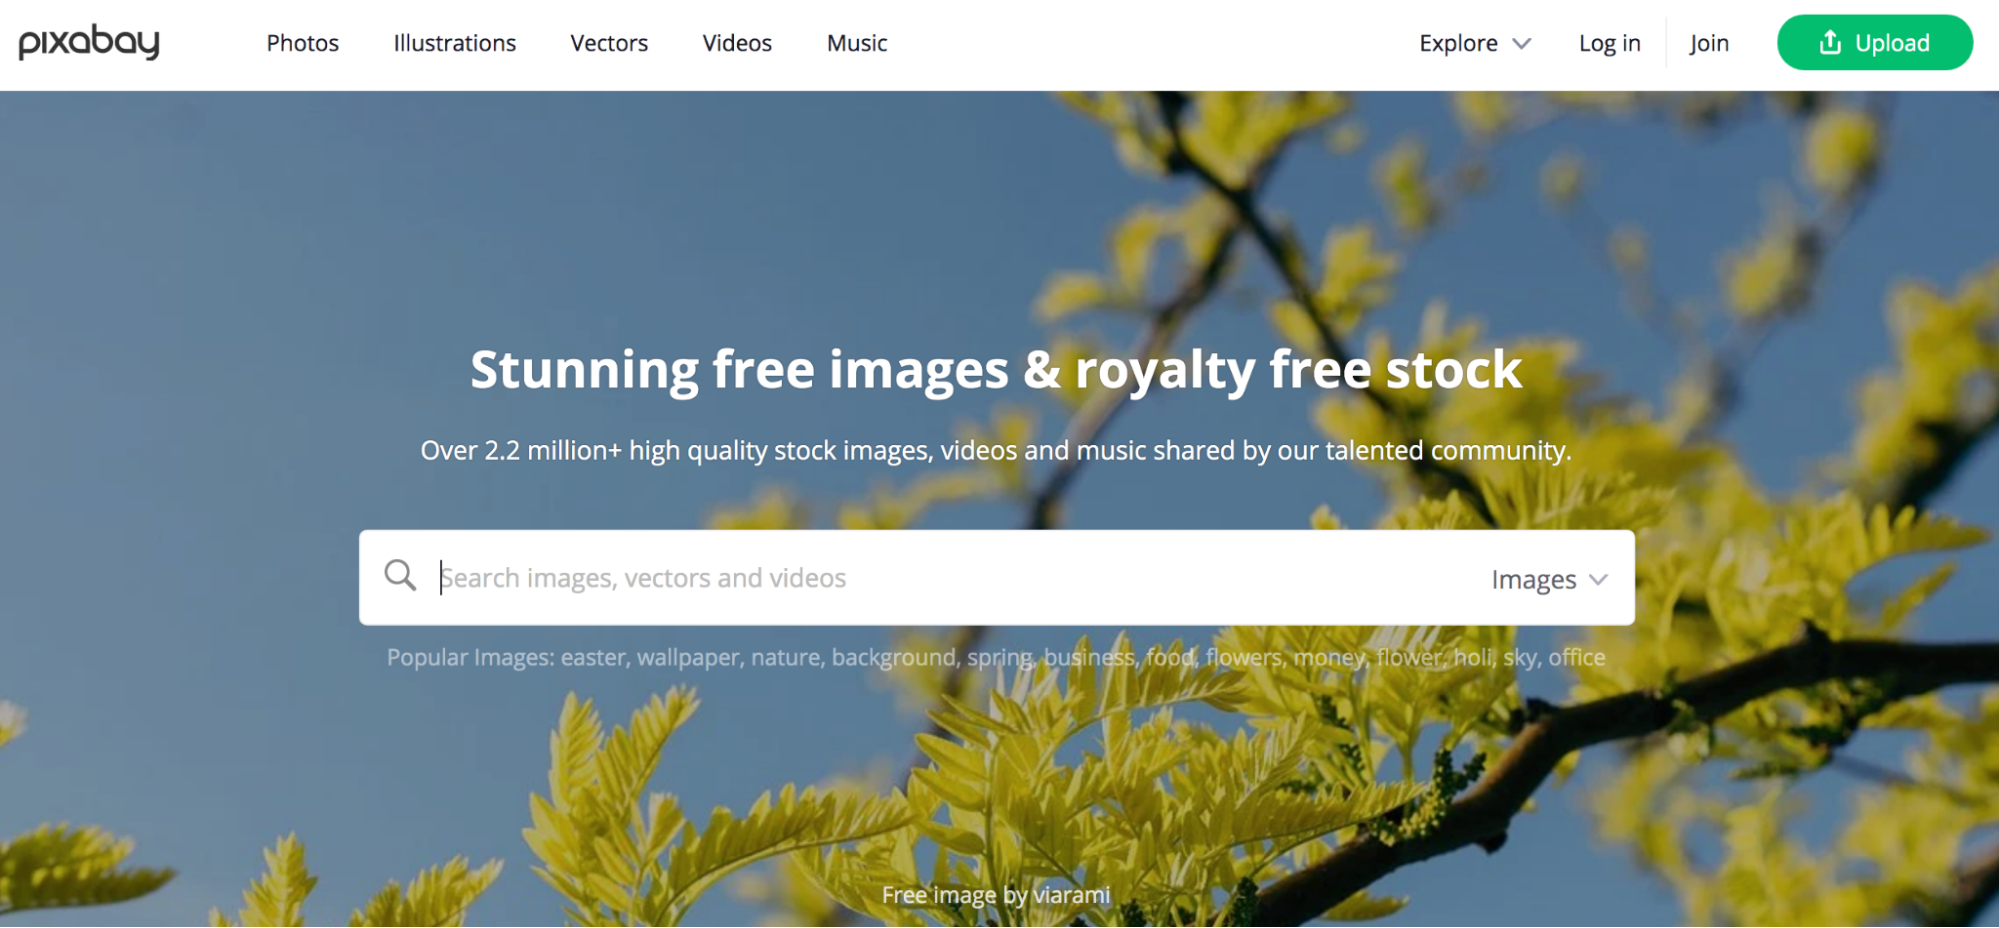 Hghg Images – Browse 4 Stock Photos, Vectors, and Video